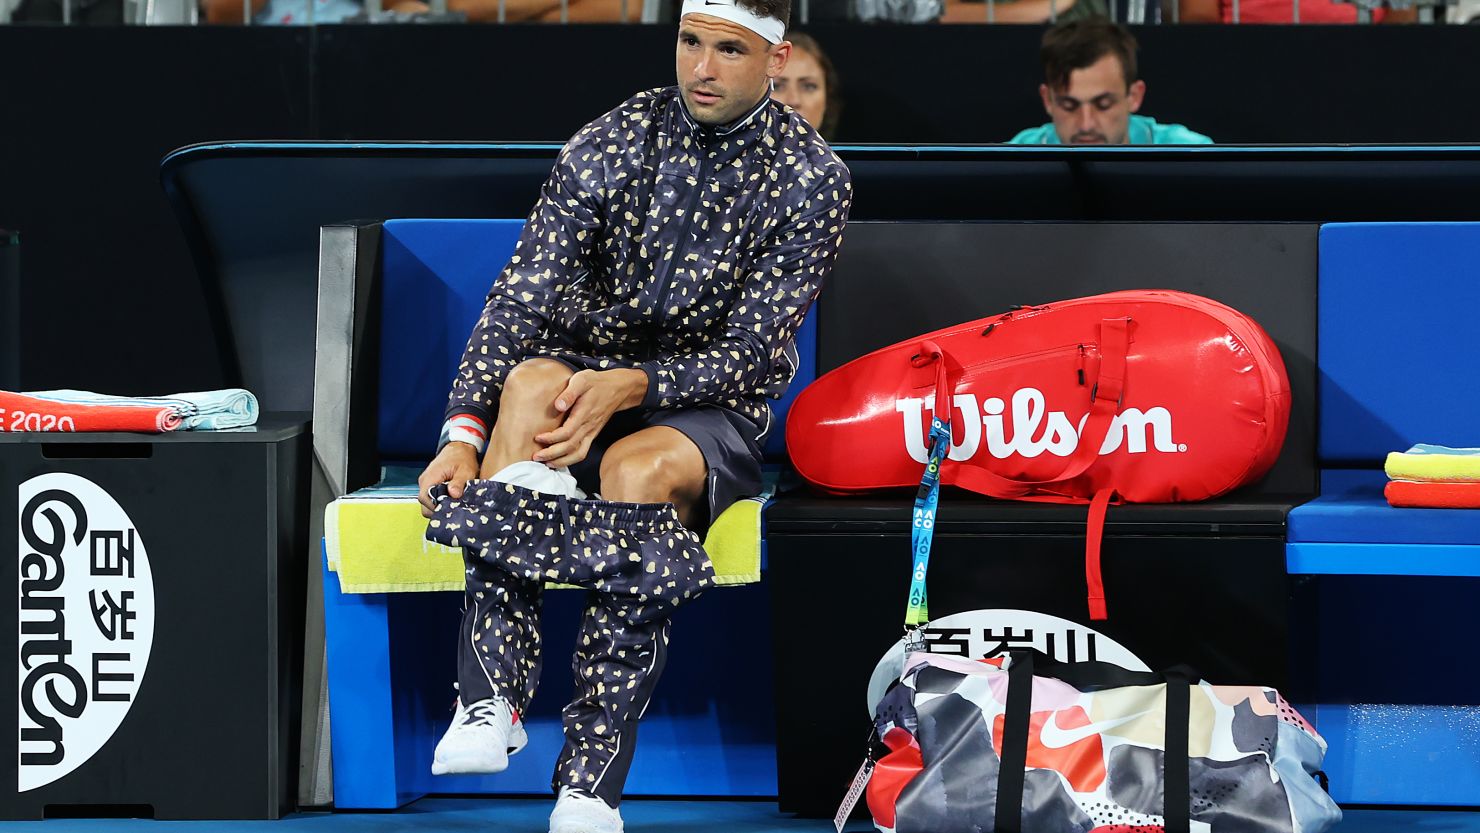 Grigor Dimitrov's tracksuit at the Australian Open -- some loved it, others were unconvinced.